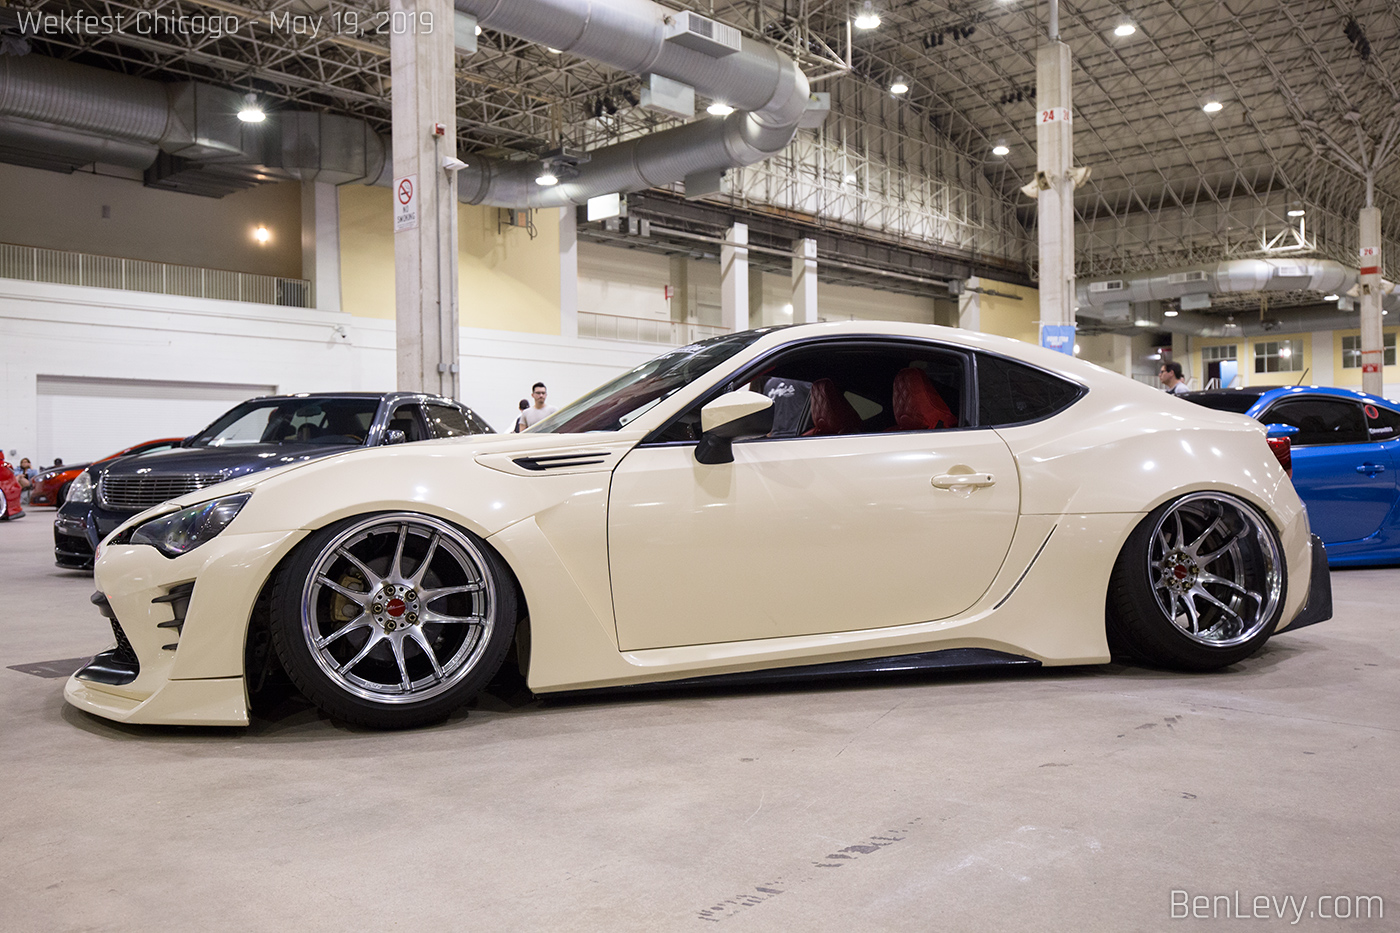 2013 Scion FR-S with Aimgain version 2 wide body kit